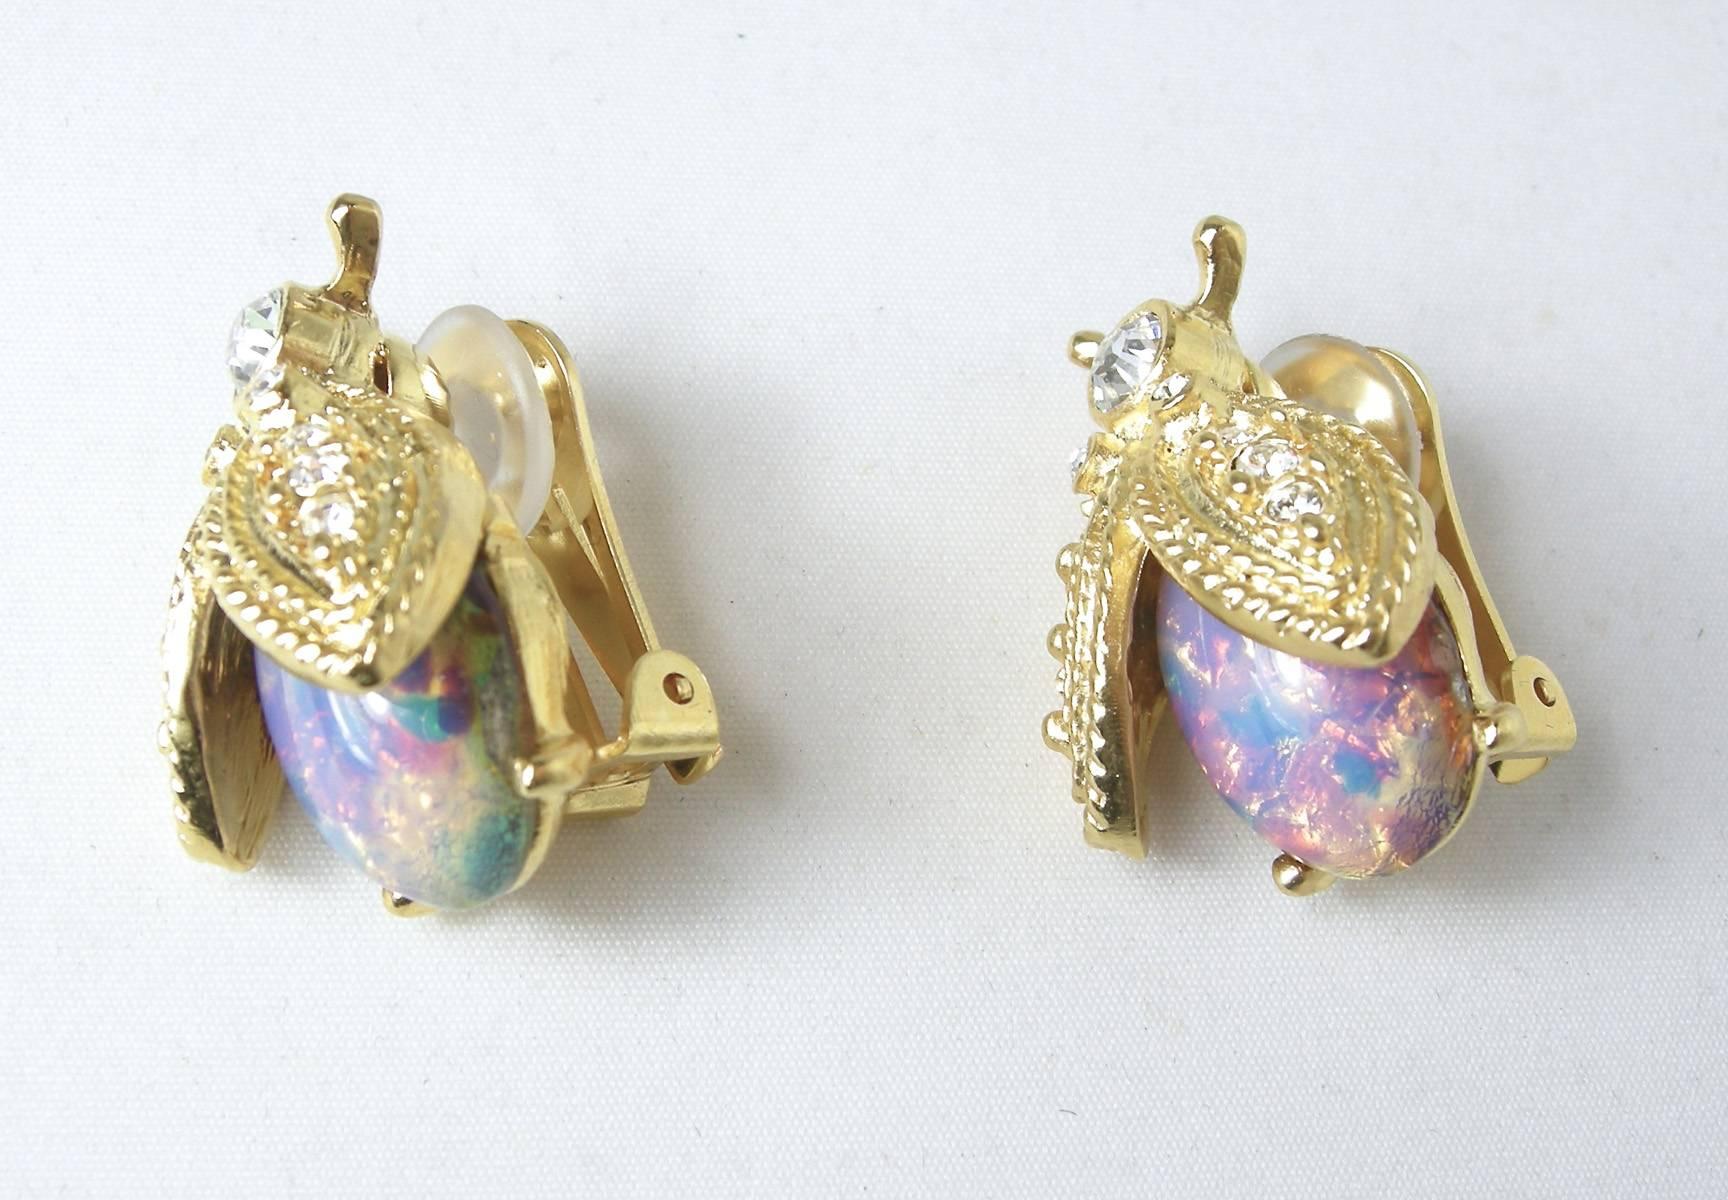 These signed Kenneth Jay Lane earrings feature a bee design with cabochon cut faux opal and clear rhinestone accents in a gold-tone setting.  In excellent condition, these clip earrings measure 1-1/8” x 3/4” and are signed “KJL”.